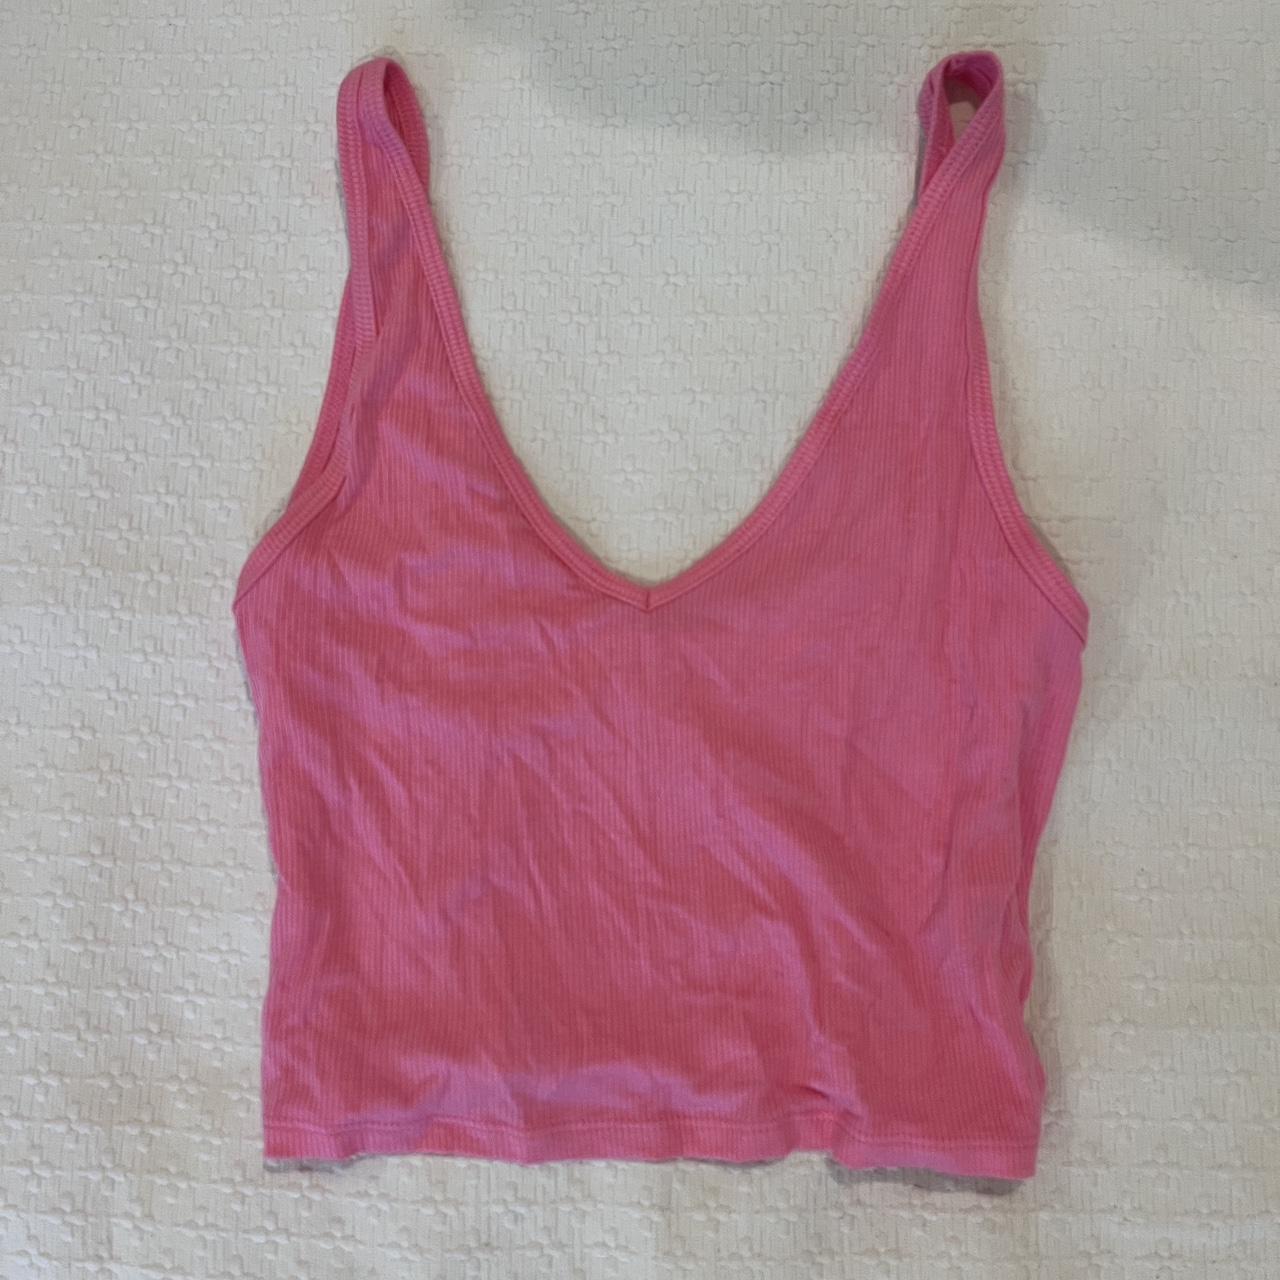 Bright Barbie pink tank top from pacsun 💓 I love... - Depop